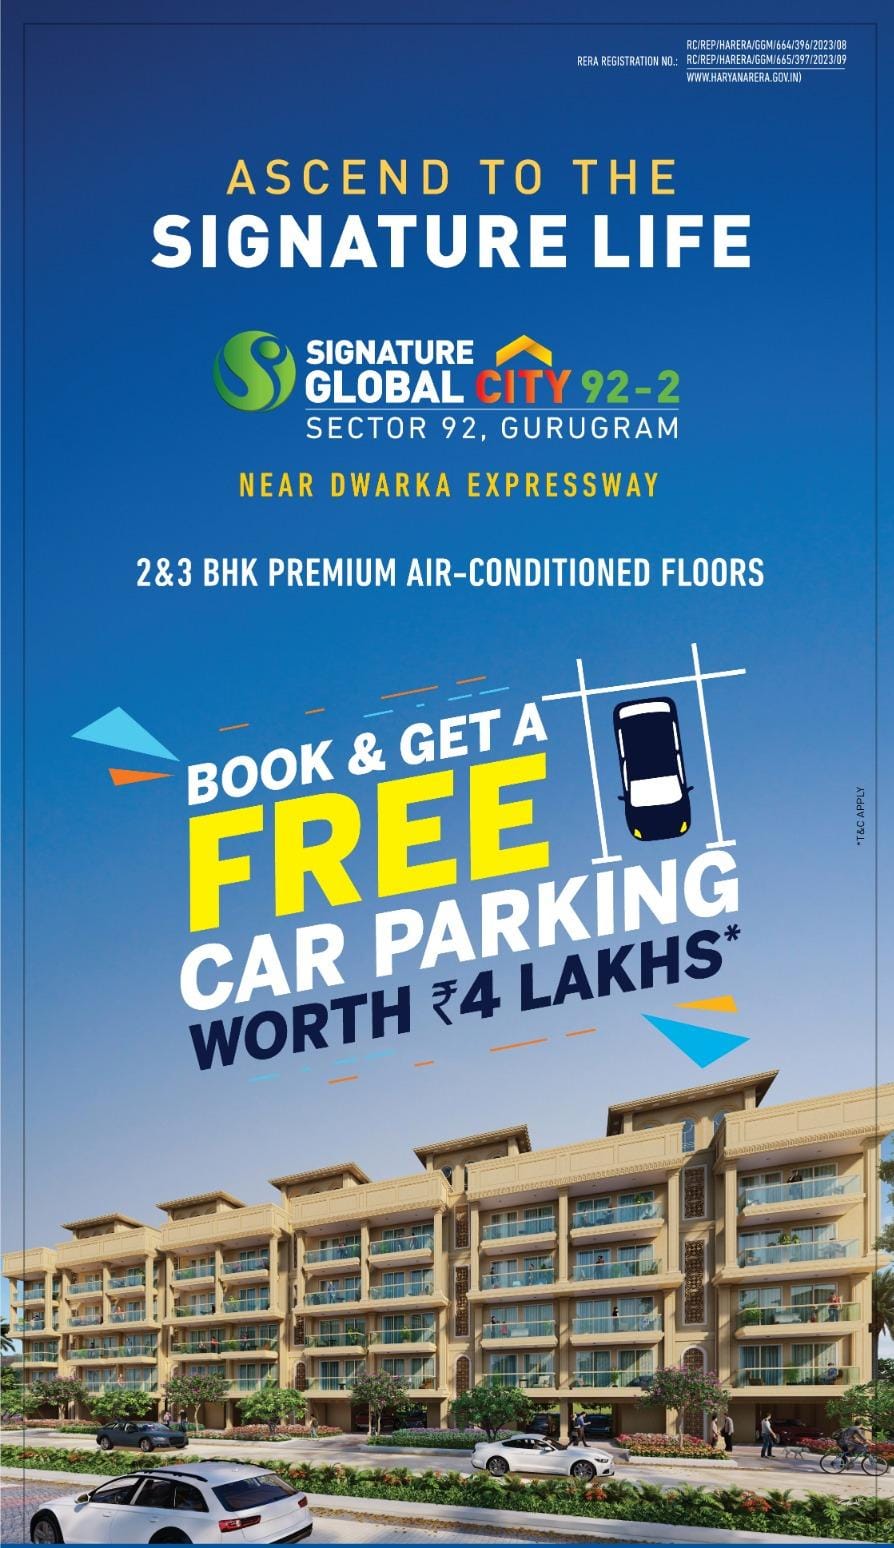 Signature Global City 92 Gurugram: Book Now and Get a Free Car Parking Worth 4 Lakhs* Update